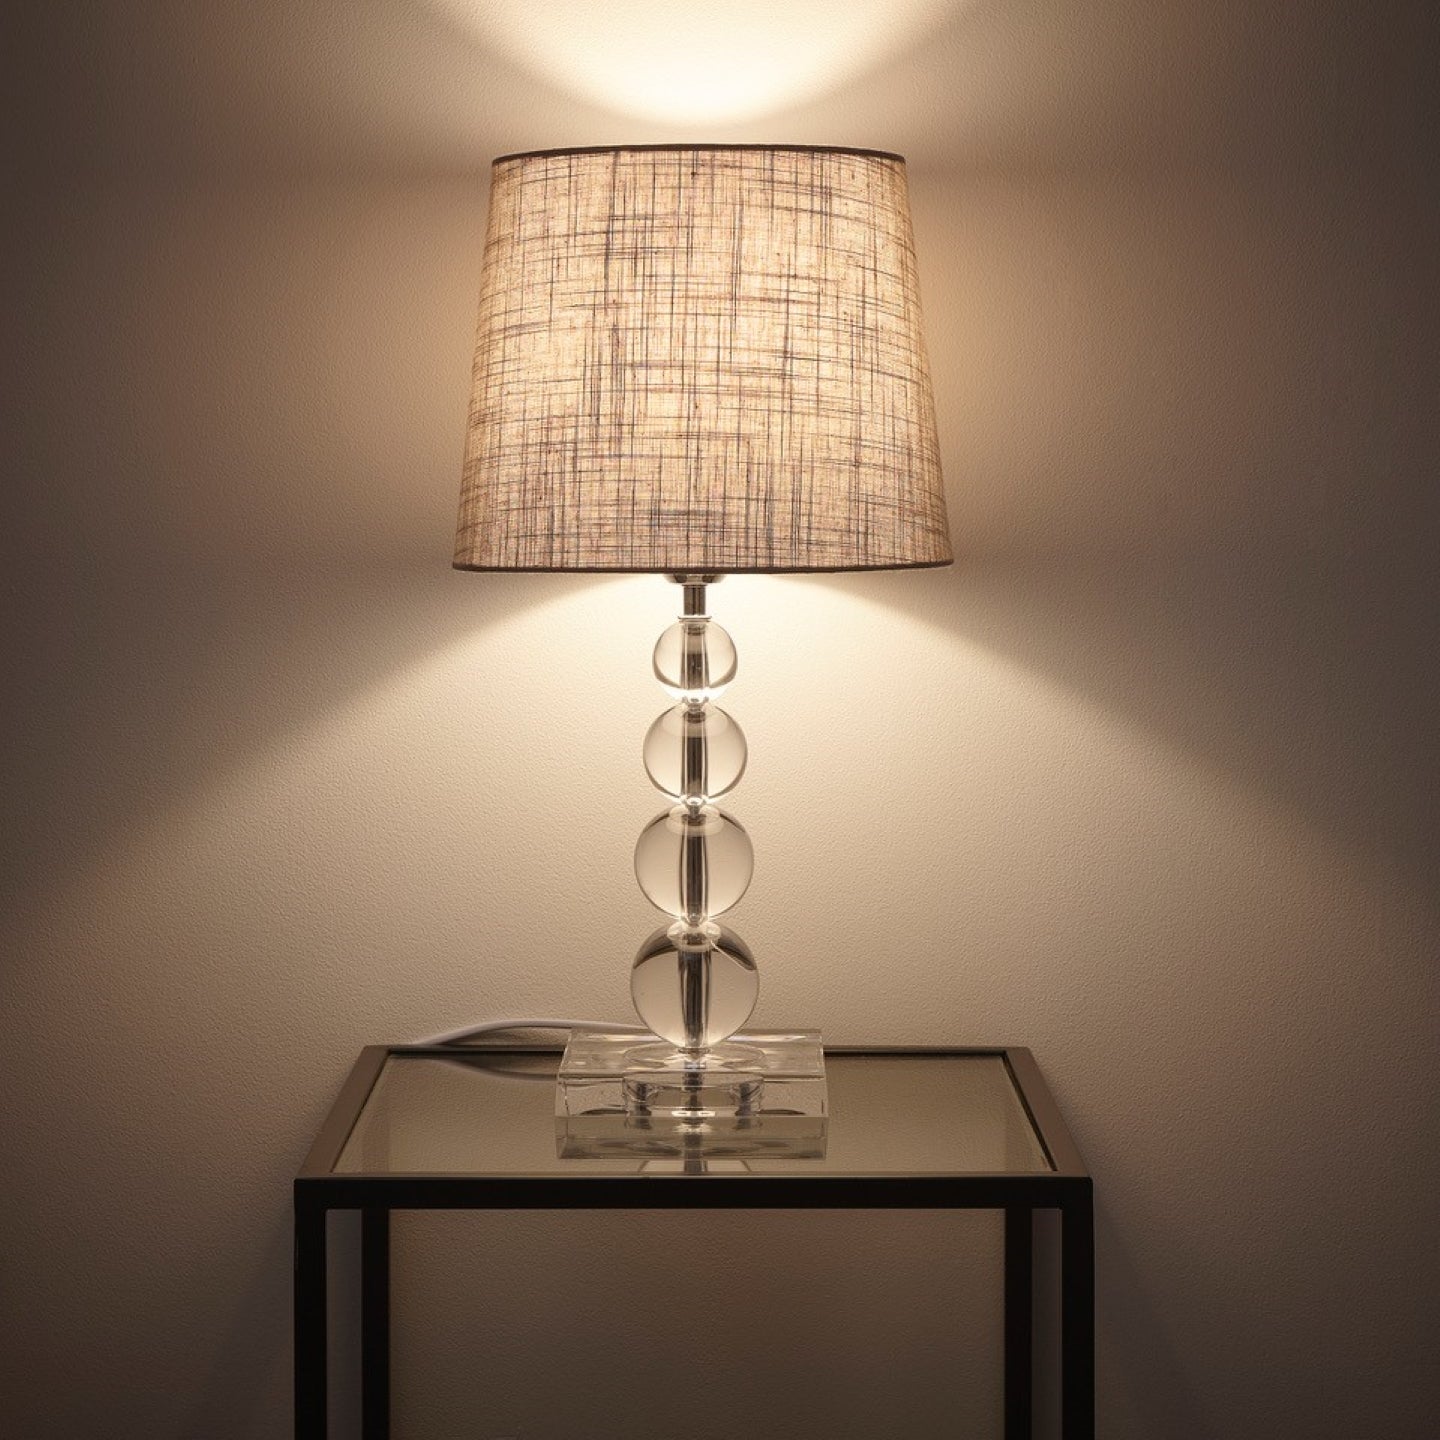 Table lamp with stunning acrylic ball structure with a linen black or grey Shade